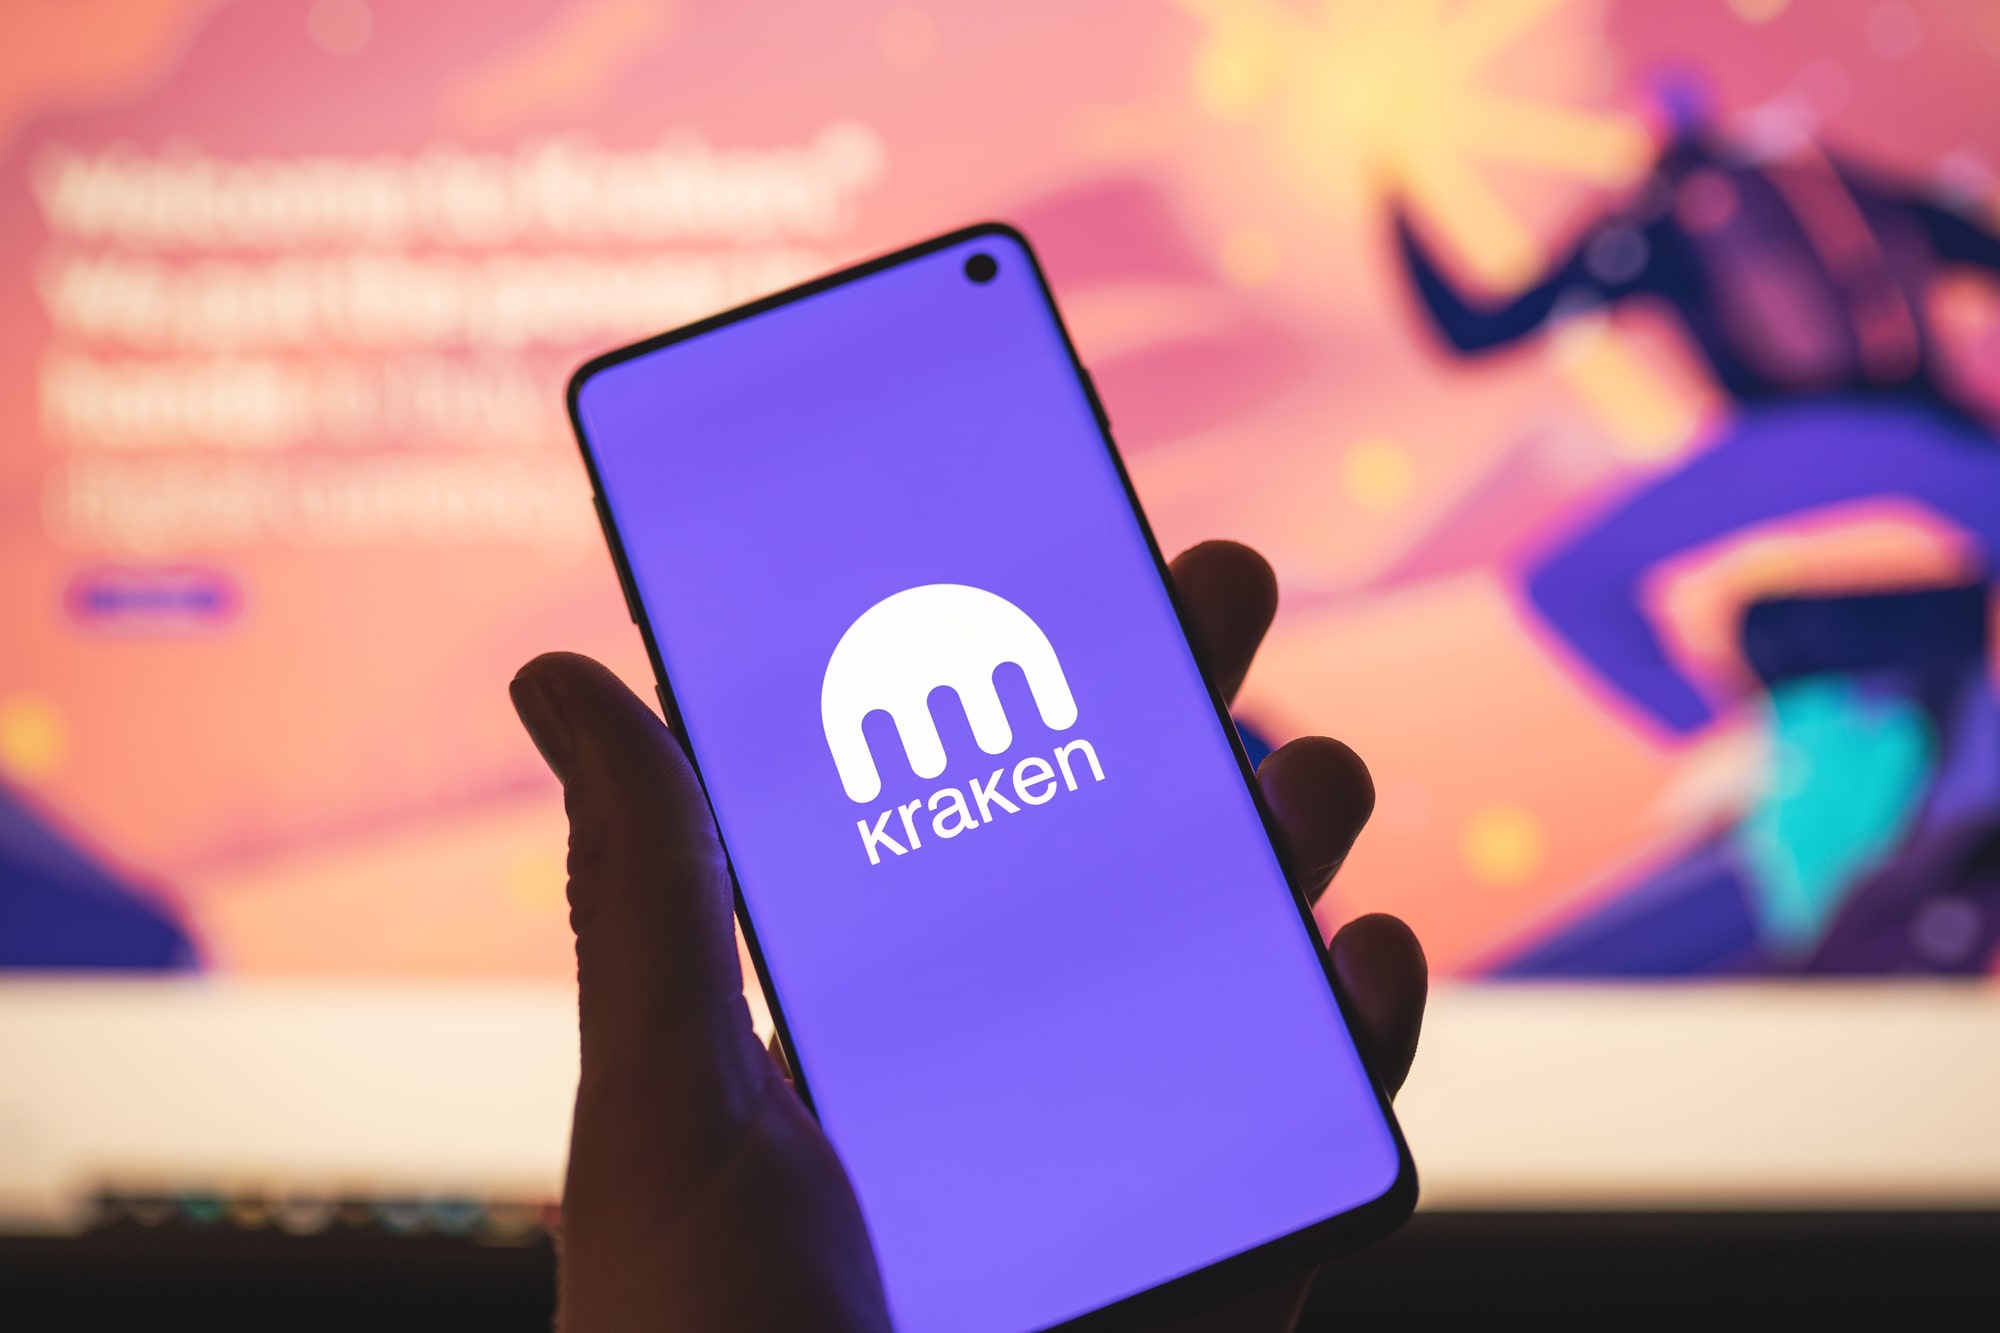 Crypto exchange Kraken plans to launch an NFT marketplace